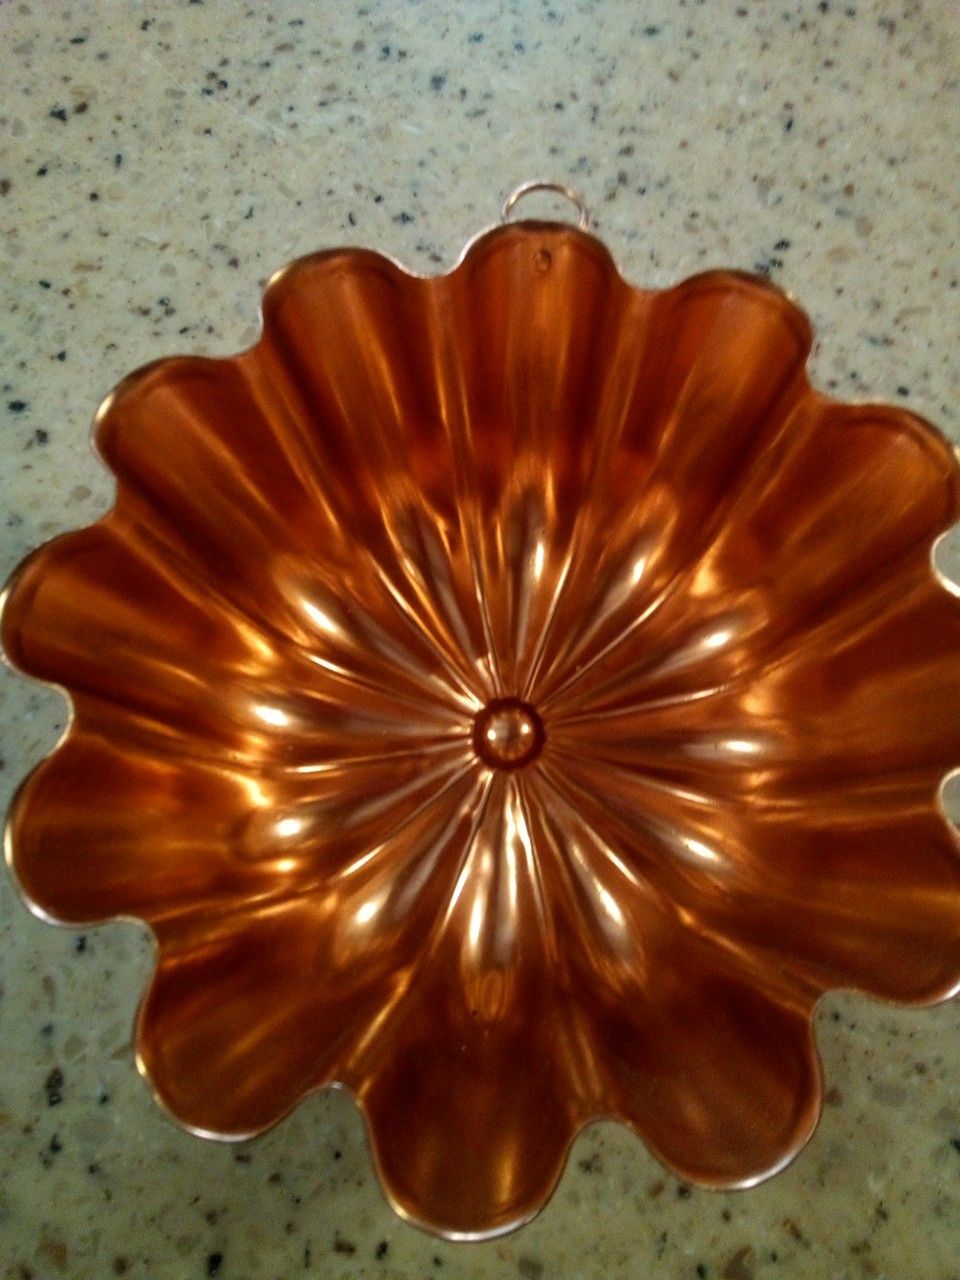 Vintage copper jello mold/3.5 cup capacity/6.5 x 3 inches/ hanging decoration or for jello